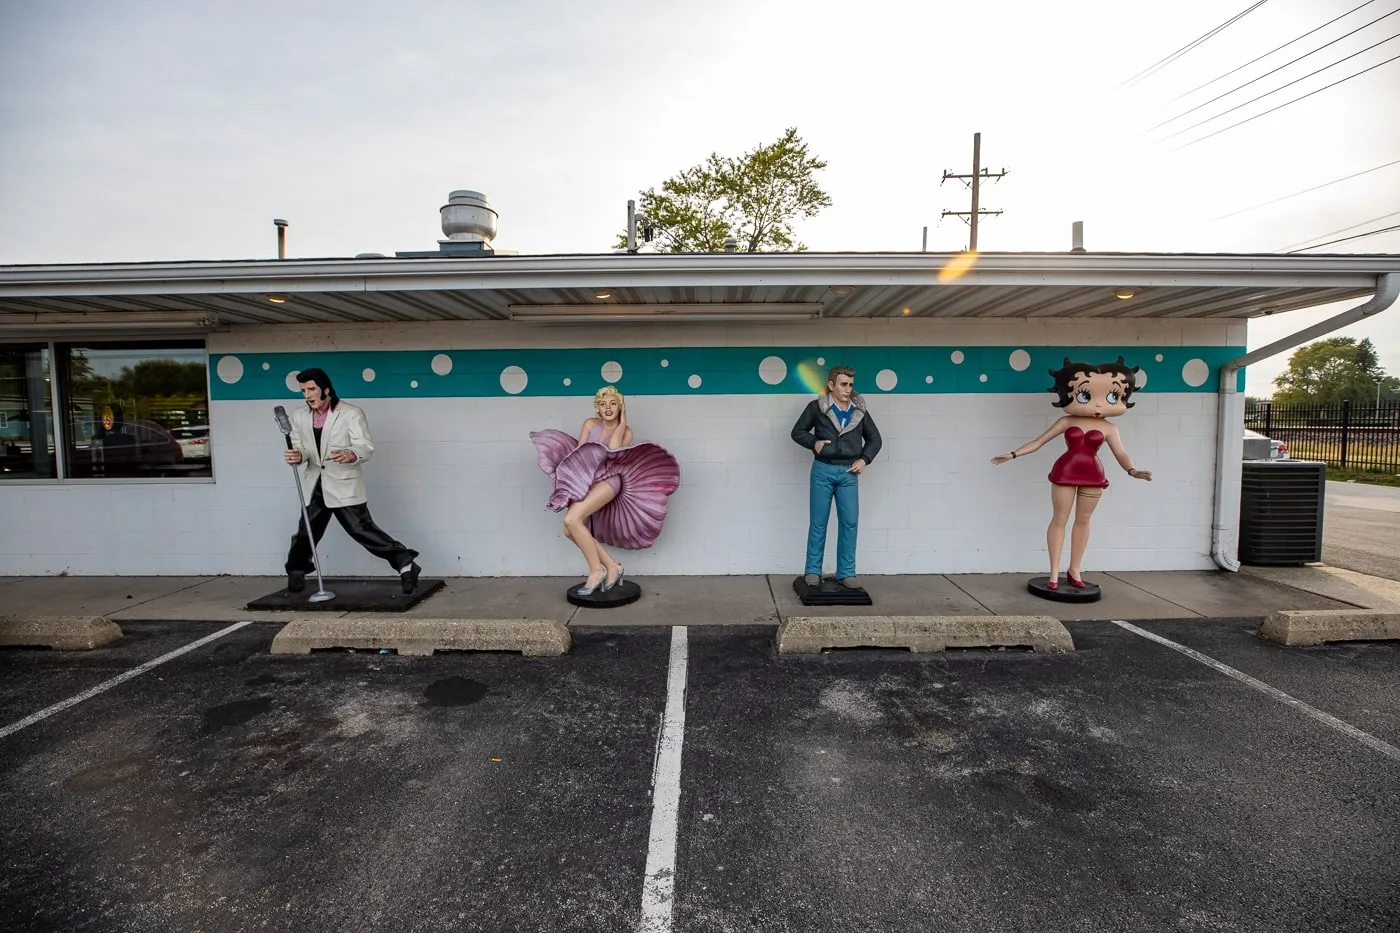 Statues of Elvis, Marilyn Monroe, James Dean, and Betty Boop at the Route 66 Polk-a-Dot Drive In in Braidwood, Illinois